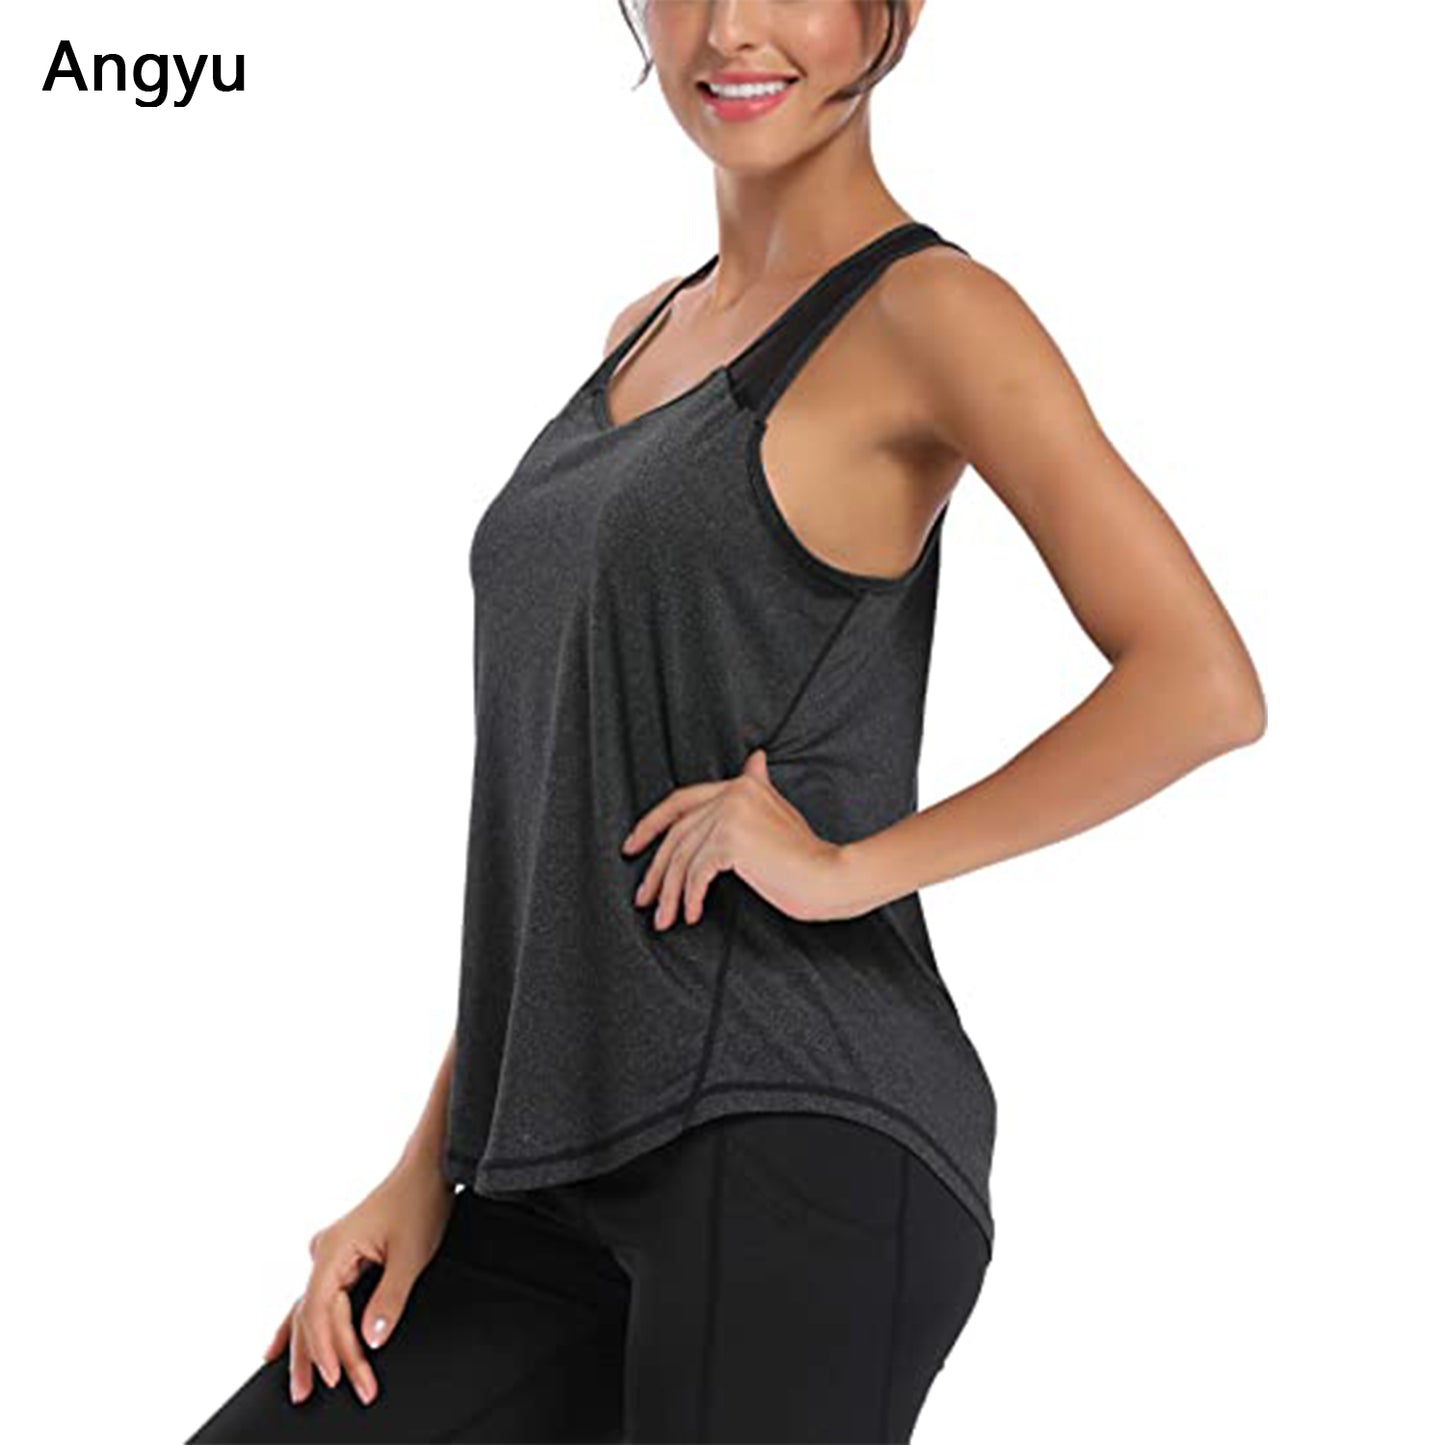 Angyu Workout Tops for Women